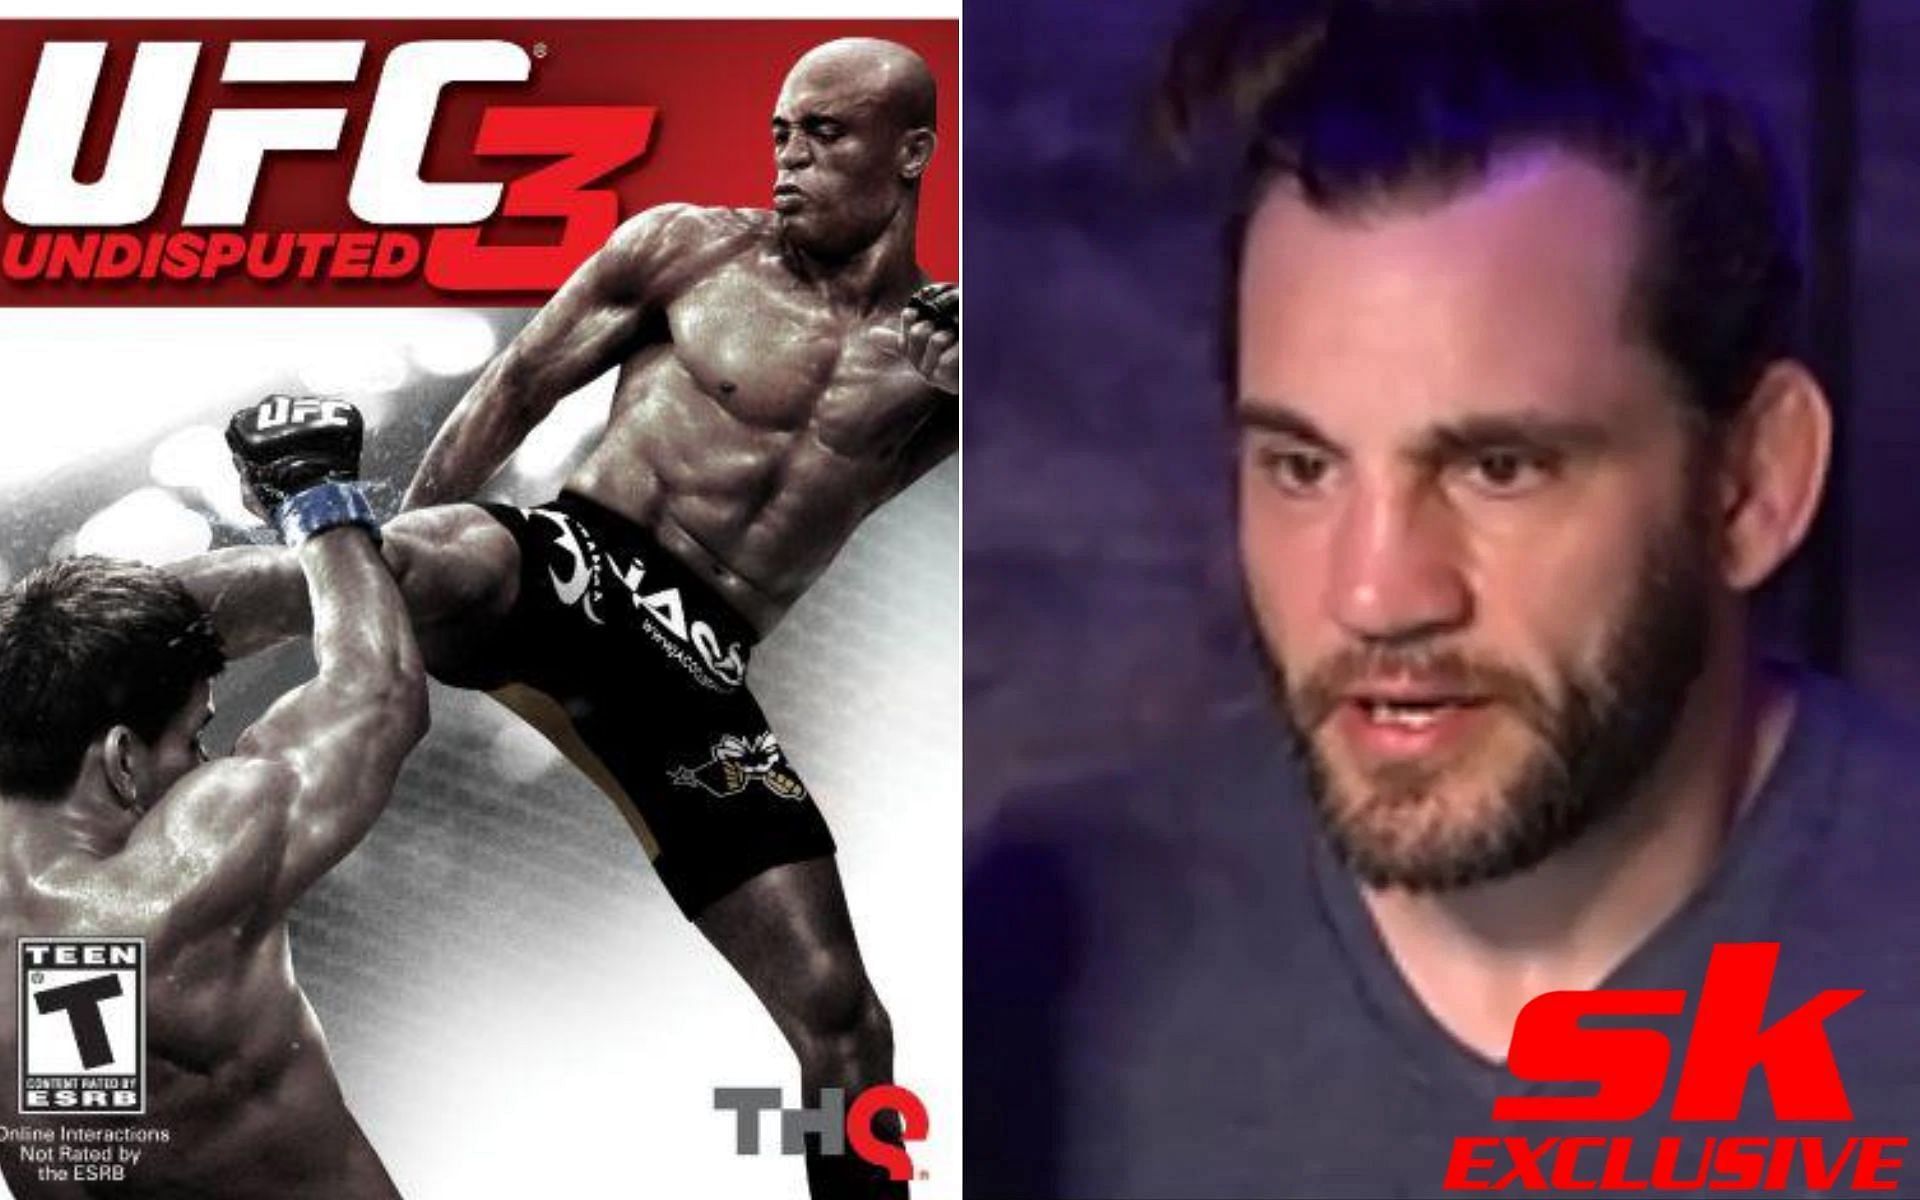 UFC Undisputed 3 cover [Left], and Jon Fitch [Right] [Photo credit: UFC Undisputed (THQ) - Facebook, and Sportskeeda MMA Originals - YouTube]